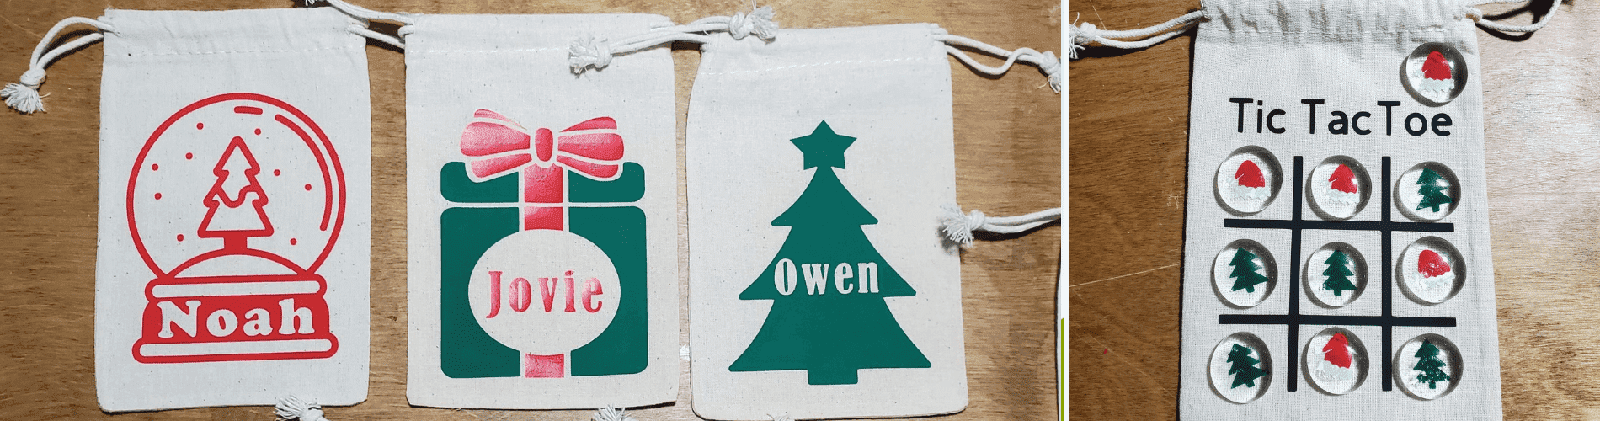 Christmas Tic Tac Toe Bags with Cricut and Easy Press